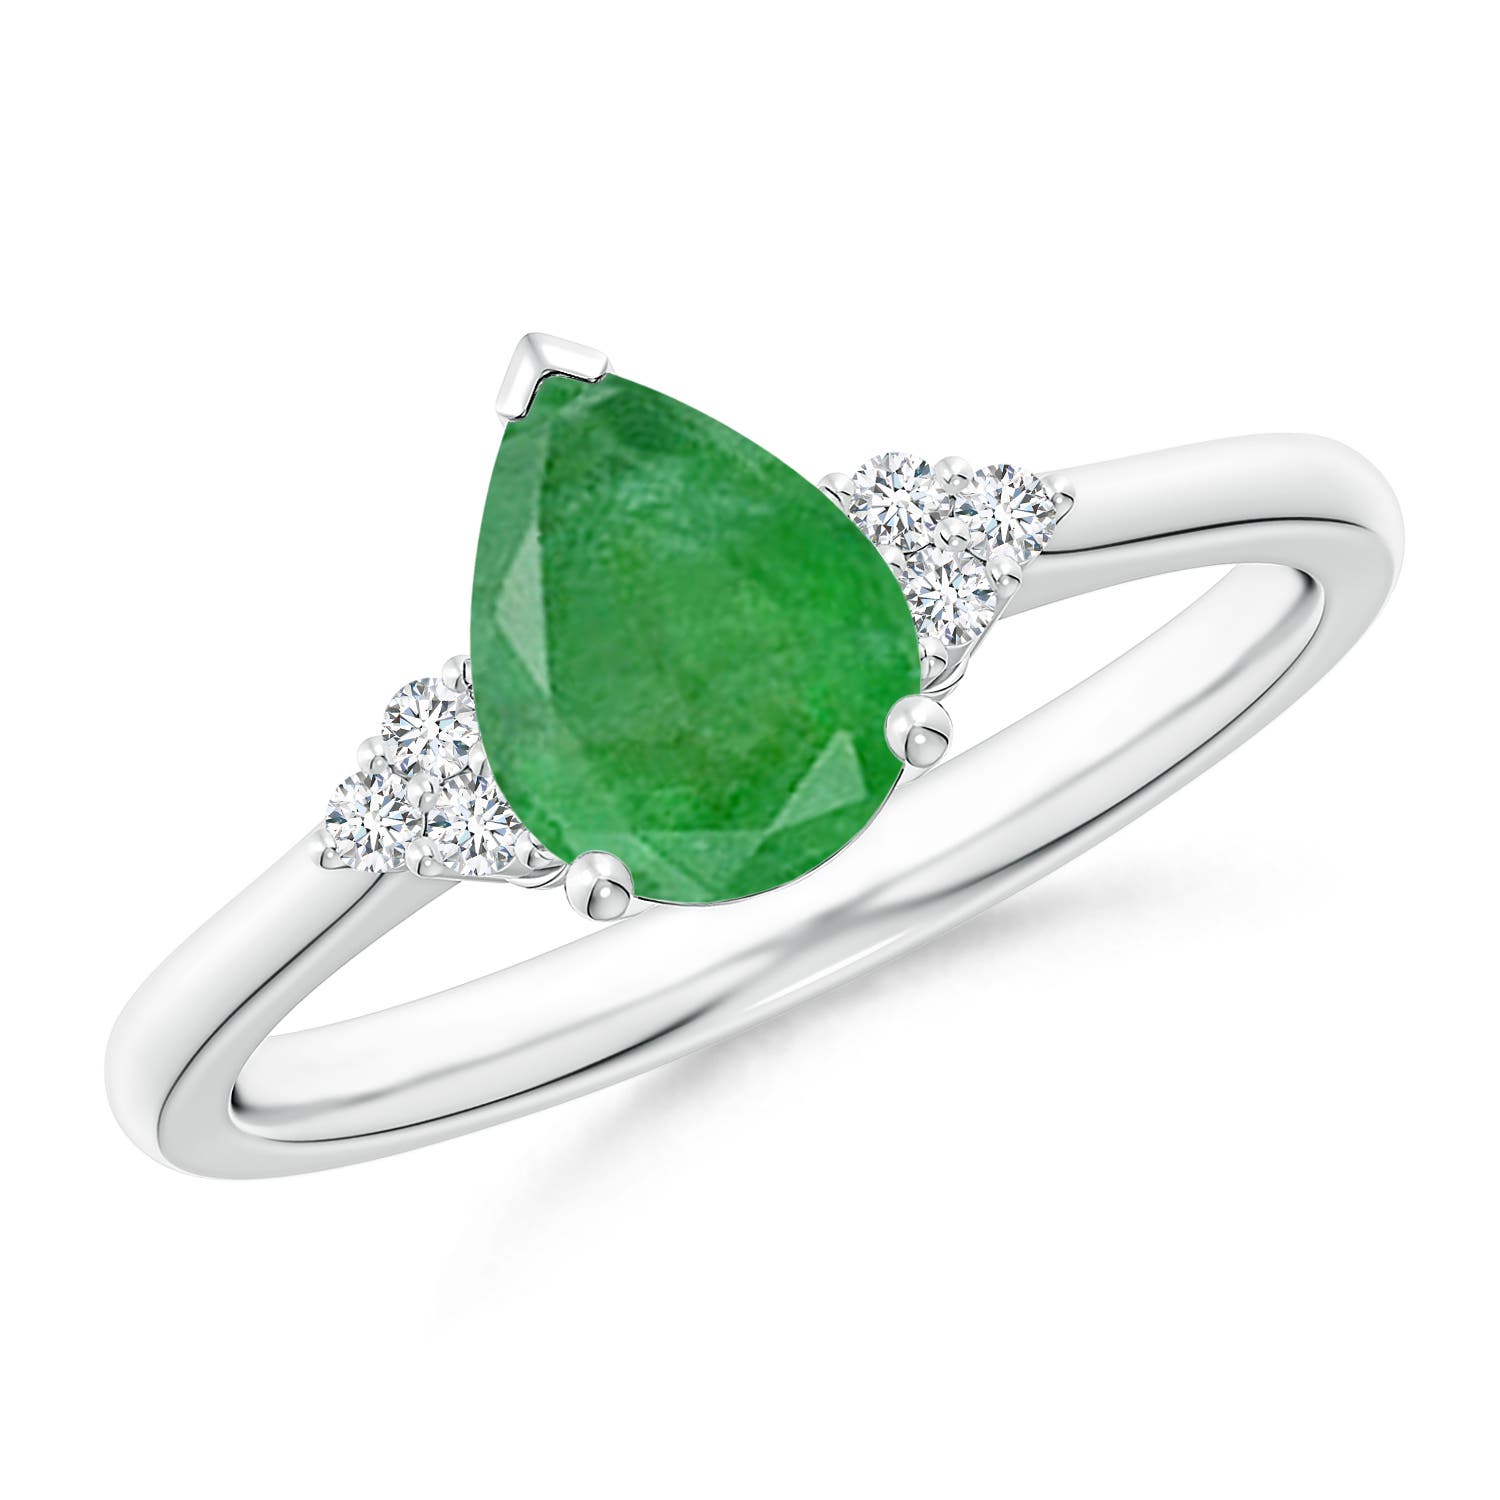 A - Emerald / 1.02 CT / 14 KT White Gold